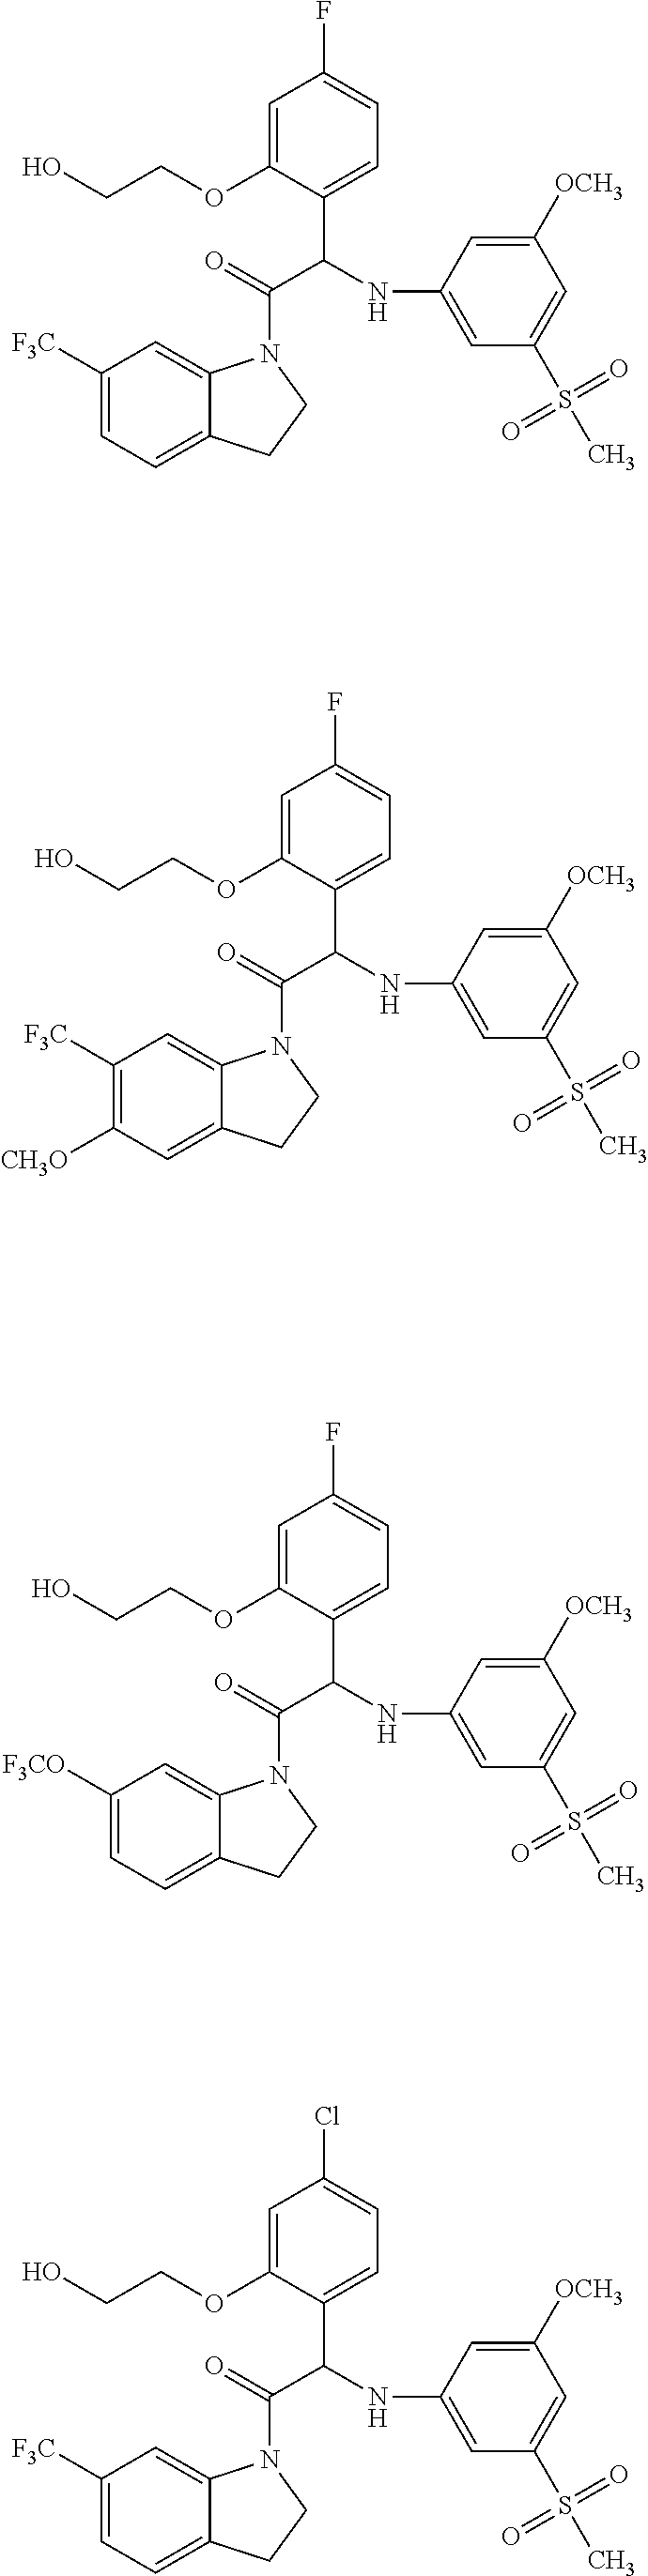 Substituted indoline derivatives as dengue viral replication inhibitors